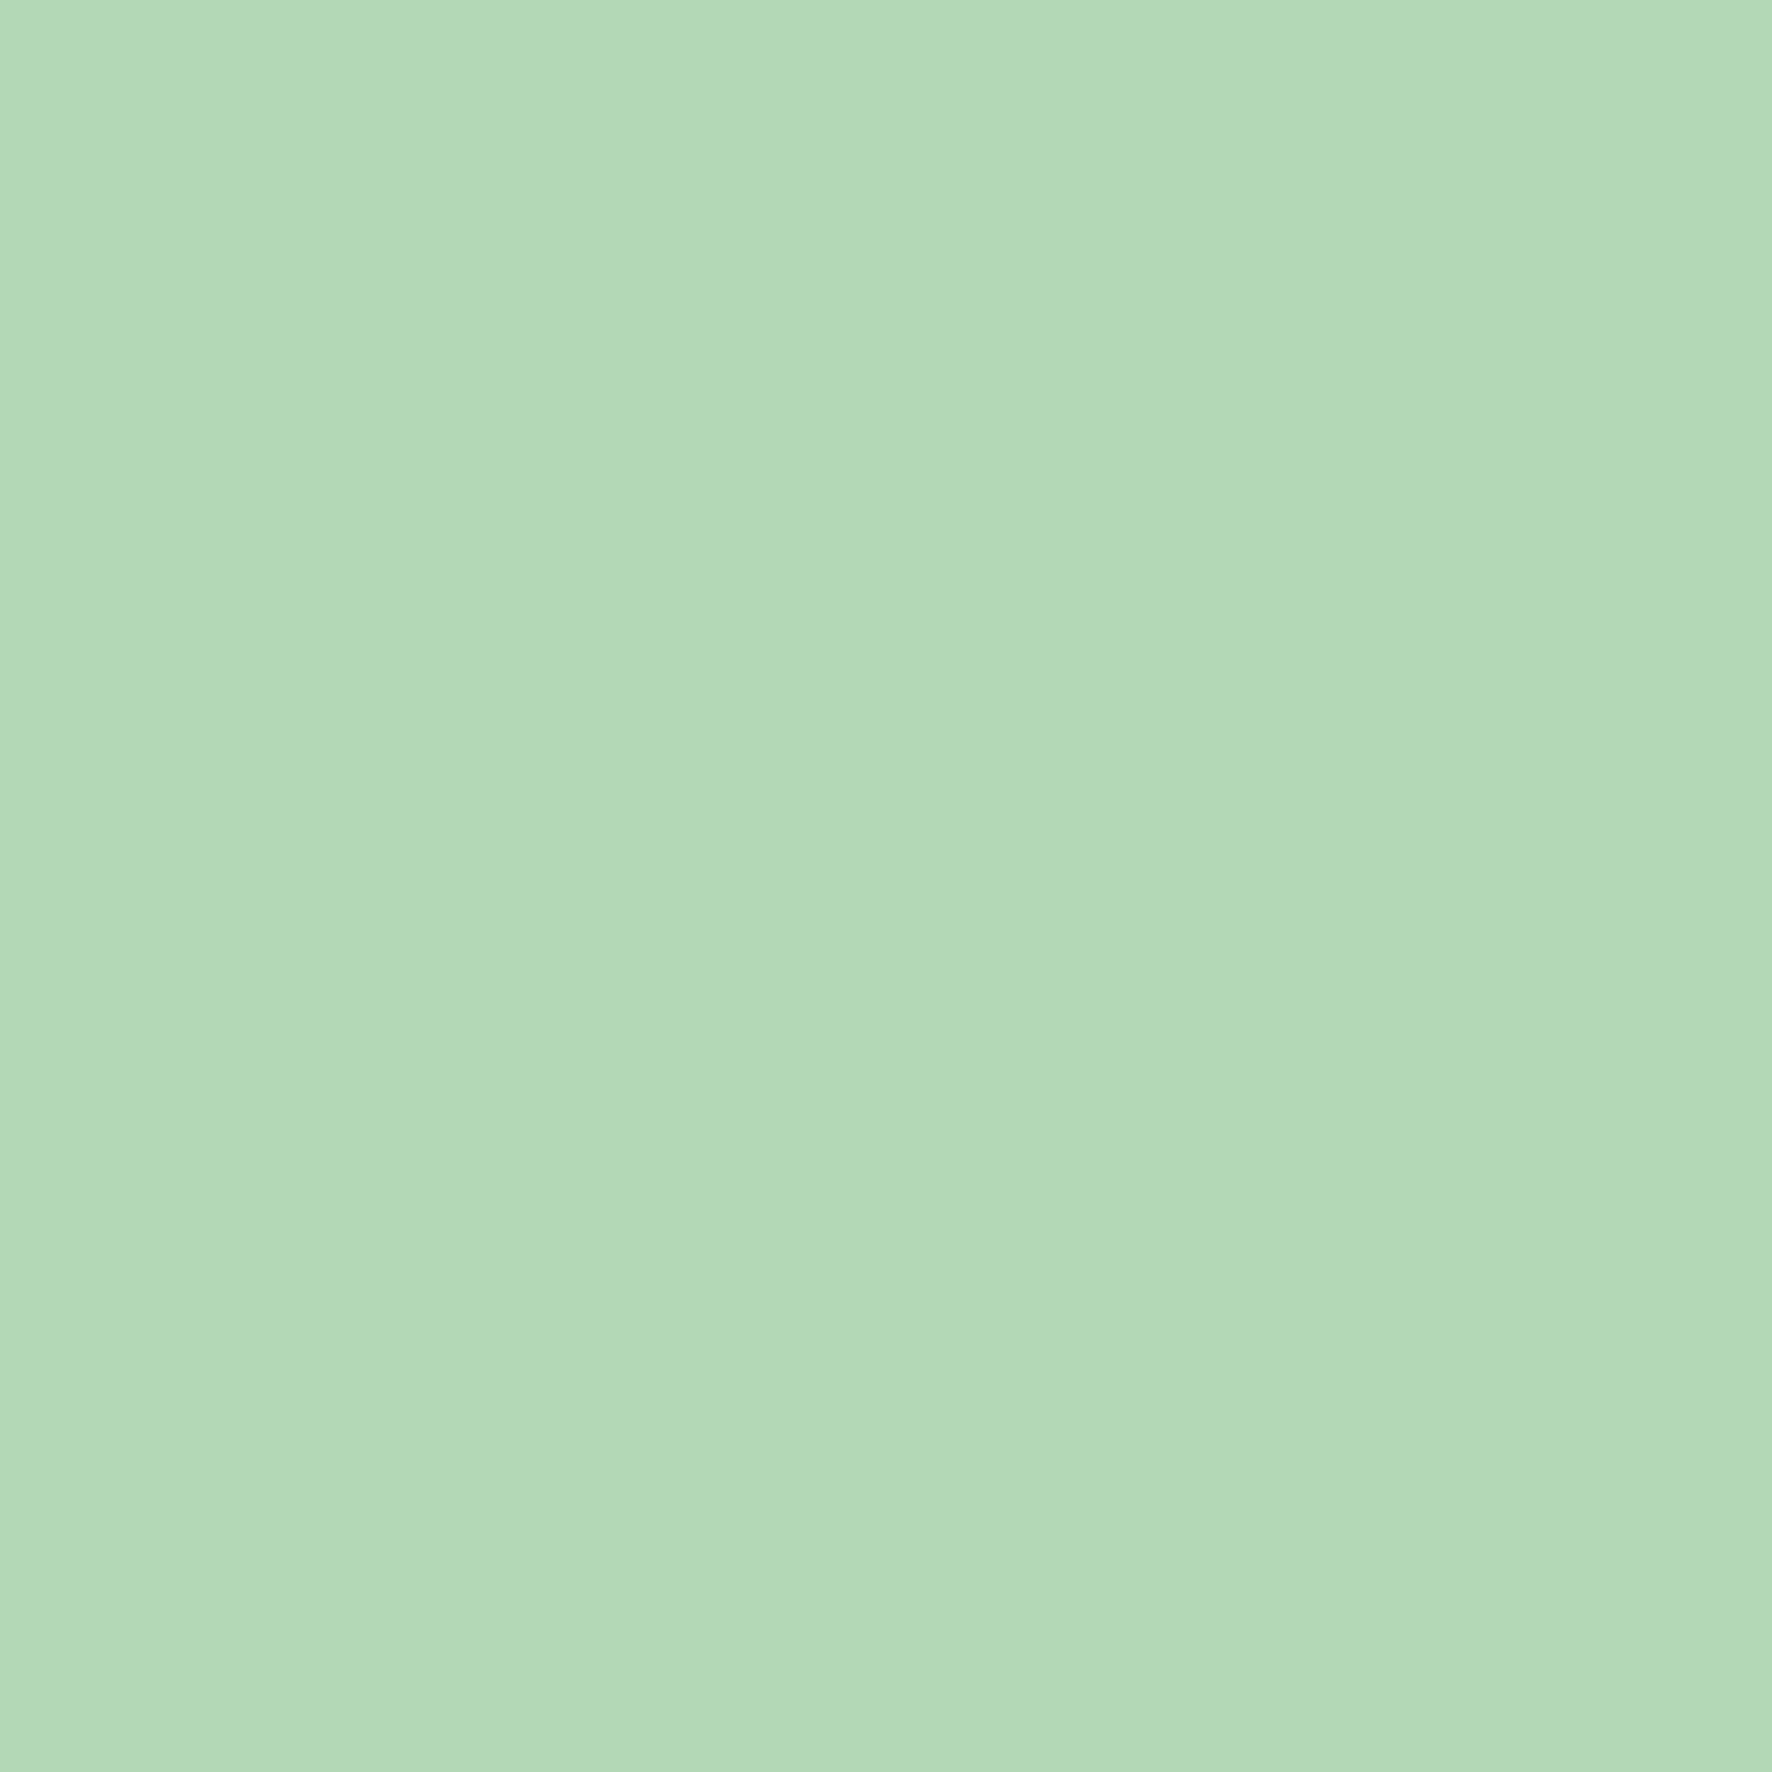 [1617465] Image A4 120g pastel green 250